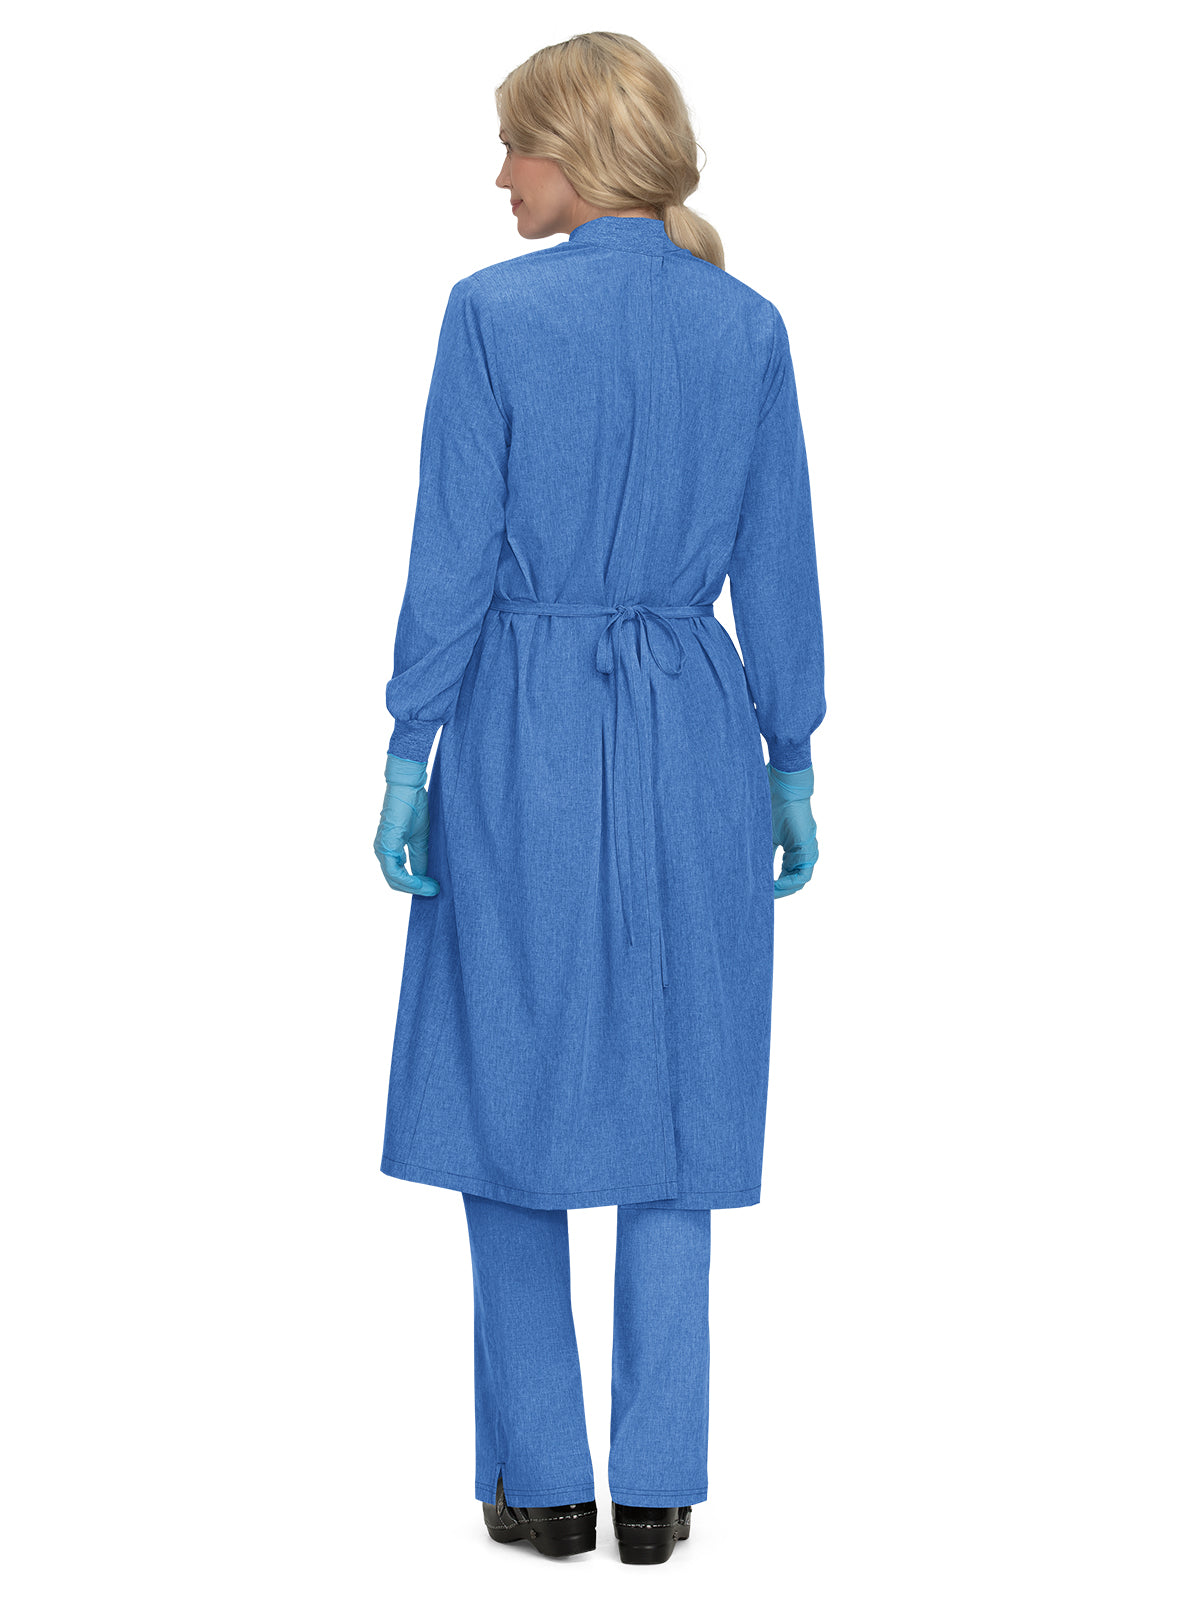 Unisex Clinical Gown